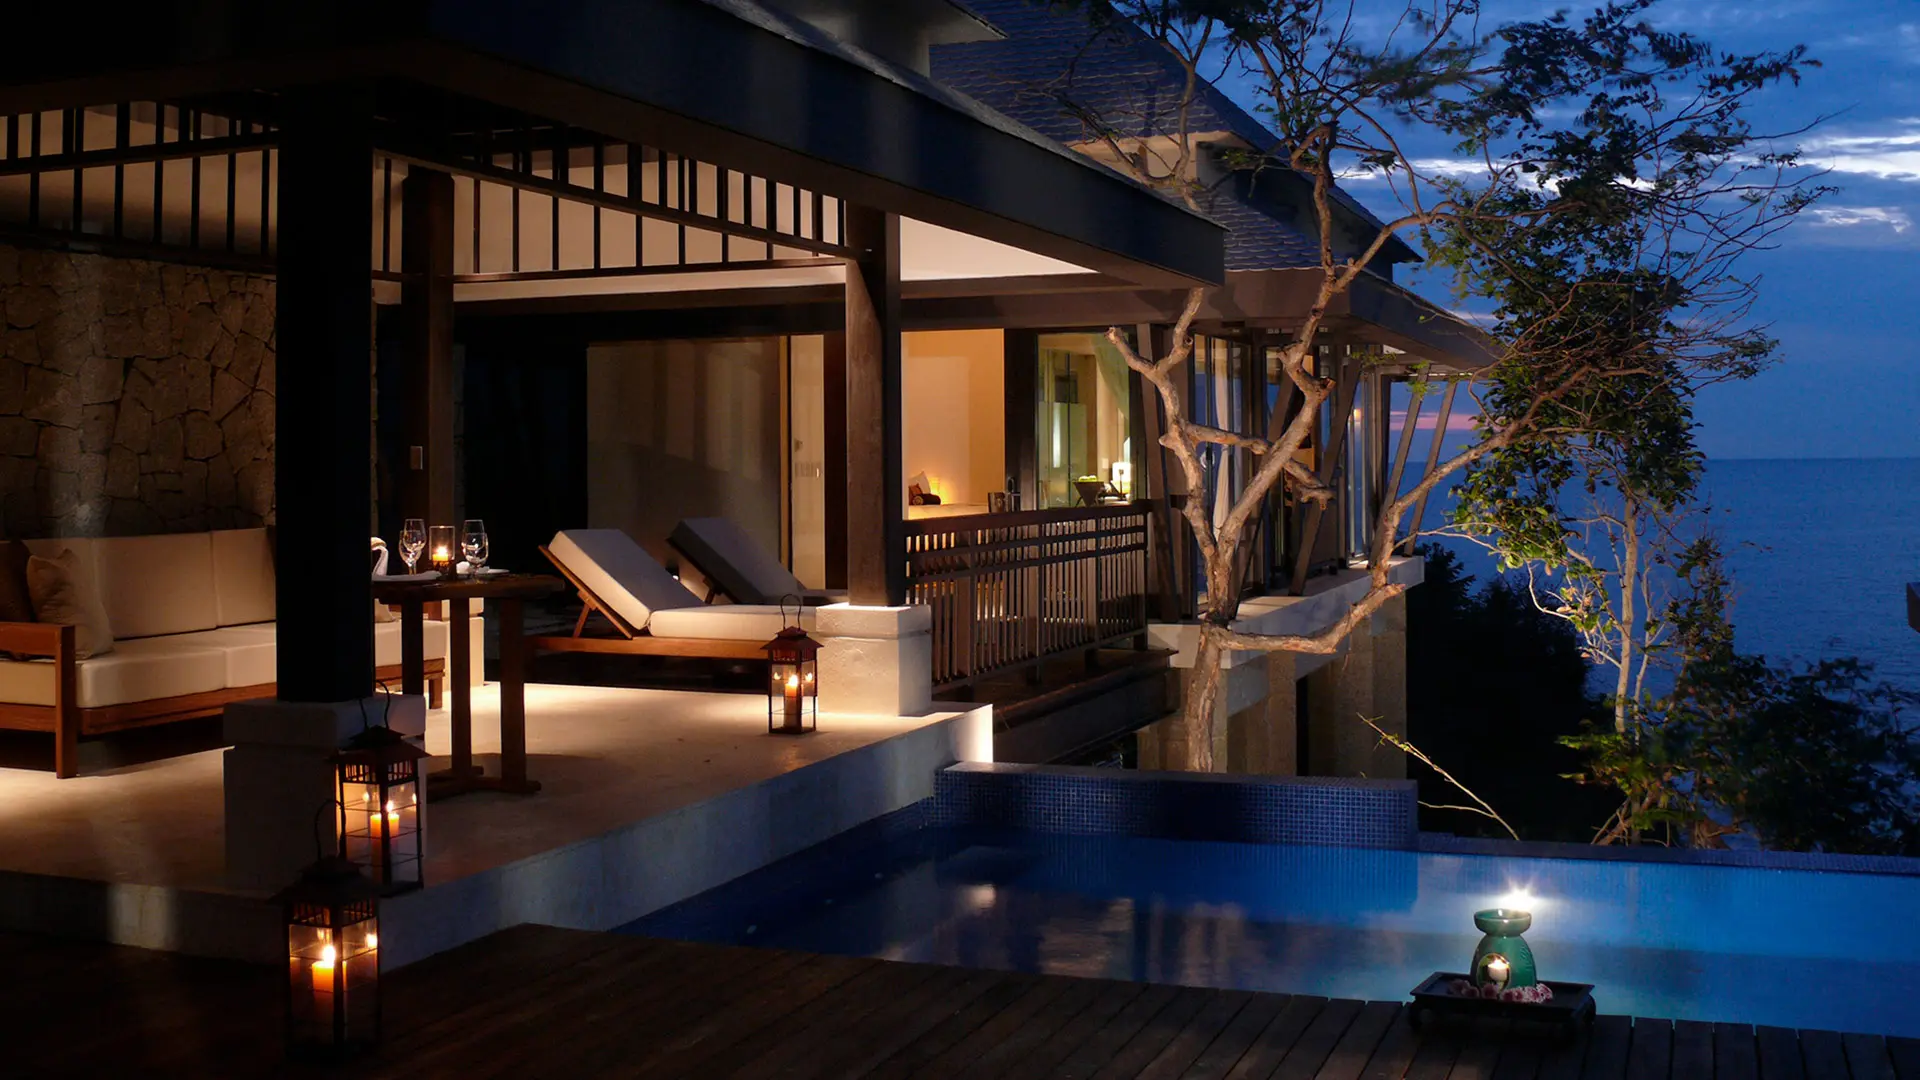 Luxury Hotels Villas With Private Pools in Acapulco Banyan Tree